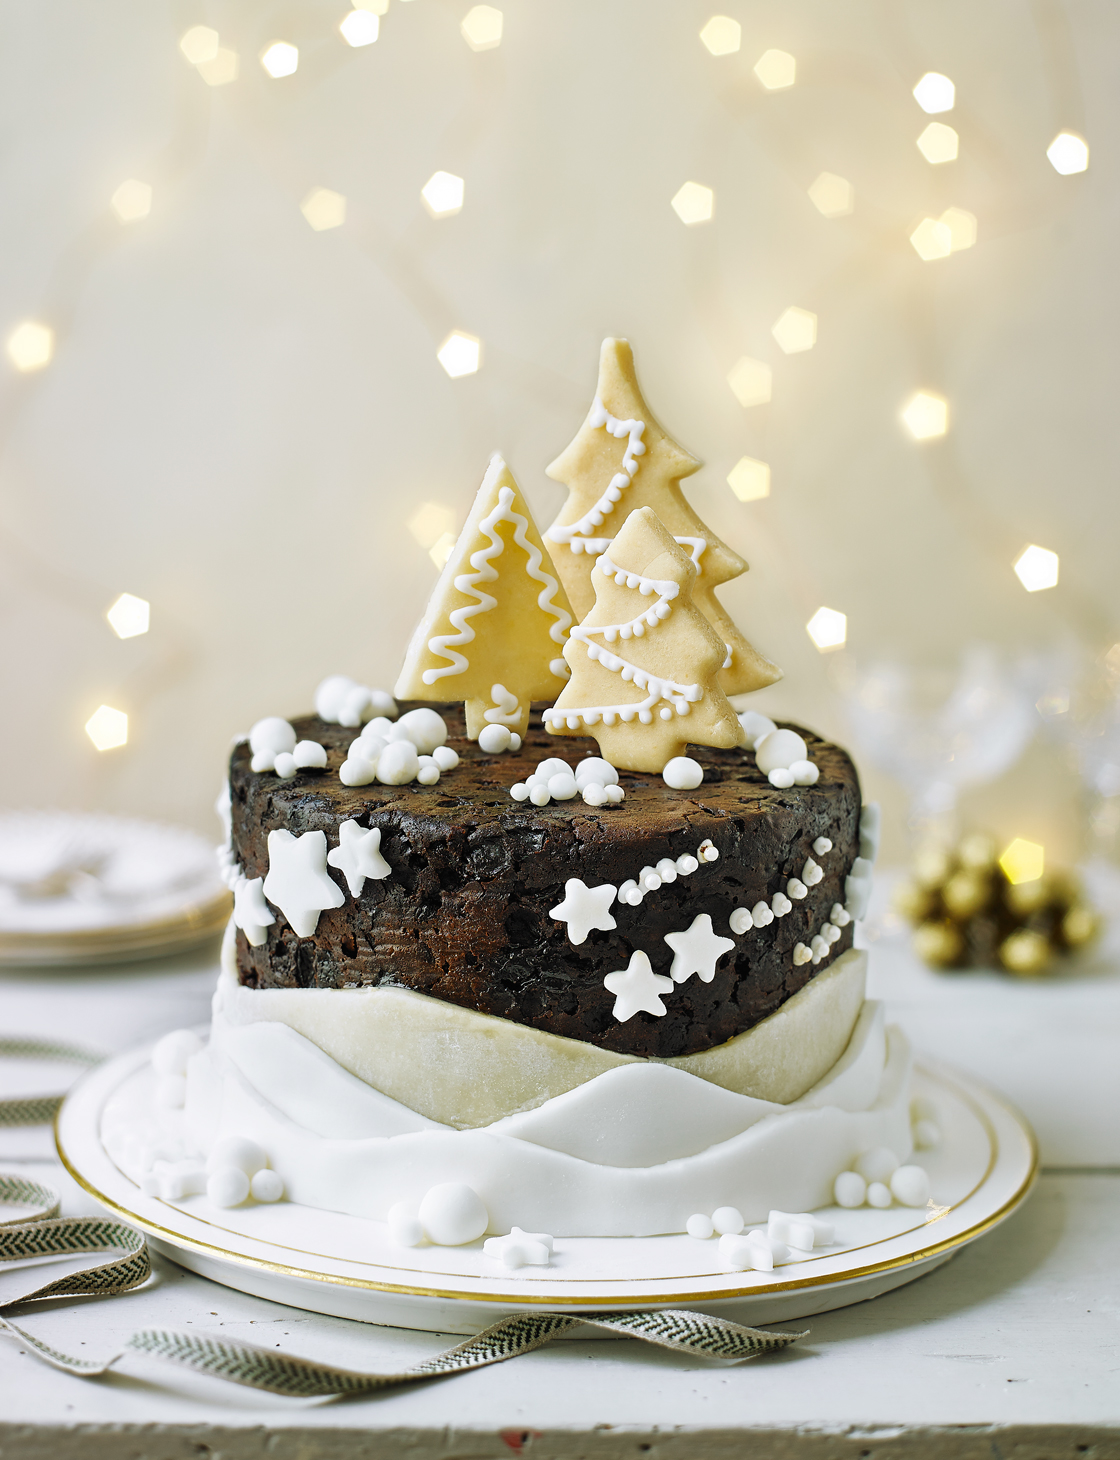 Let-it-glow Christmas cake - BBC Good Food Middle East